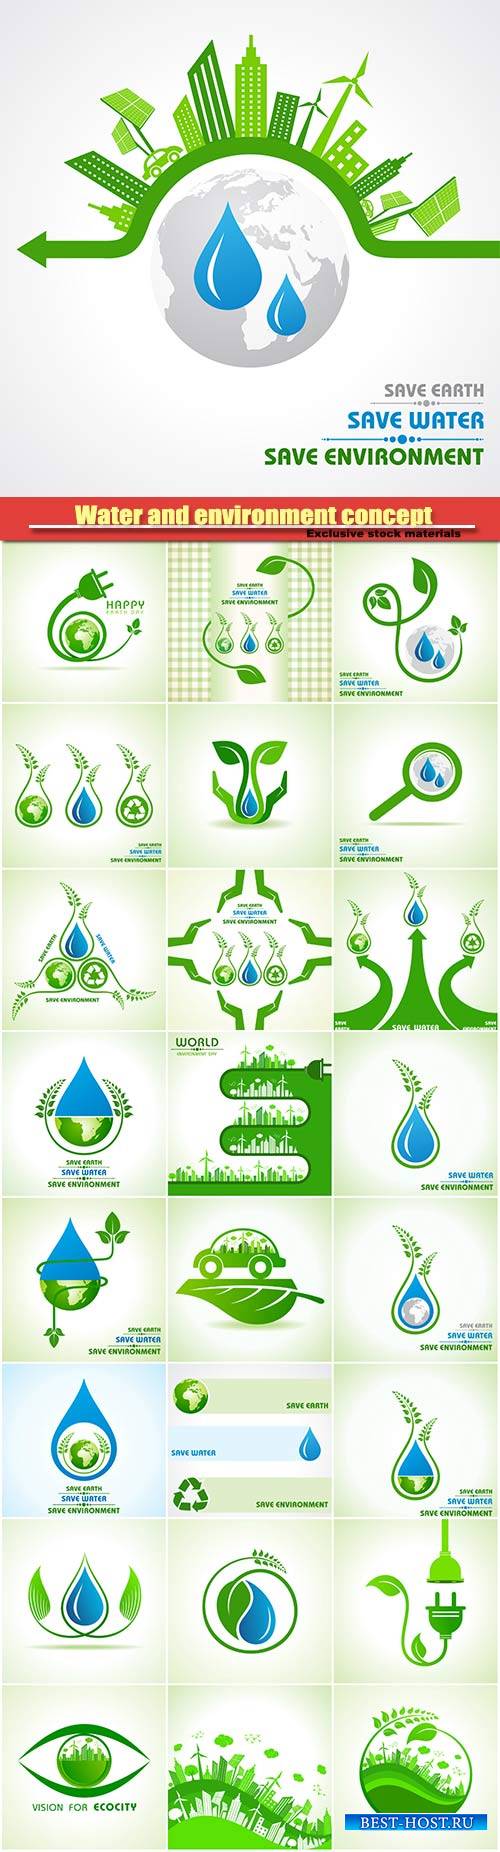 Save earth, water and environment concept